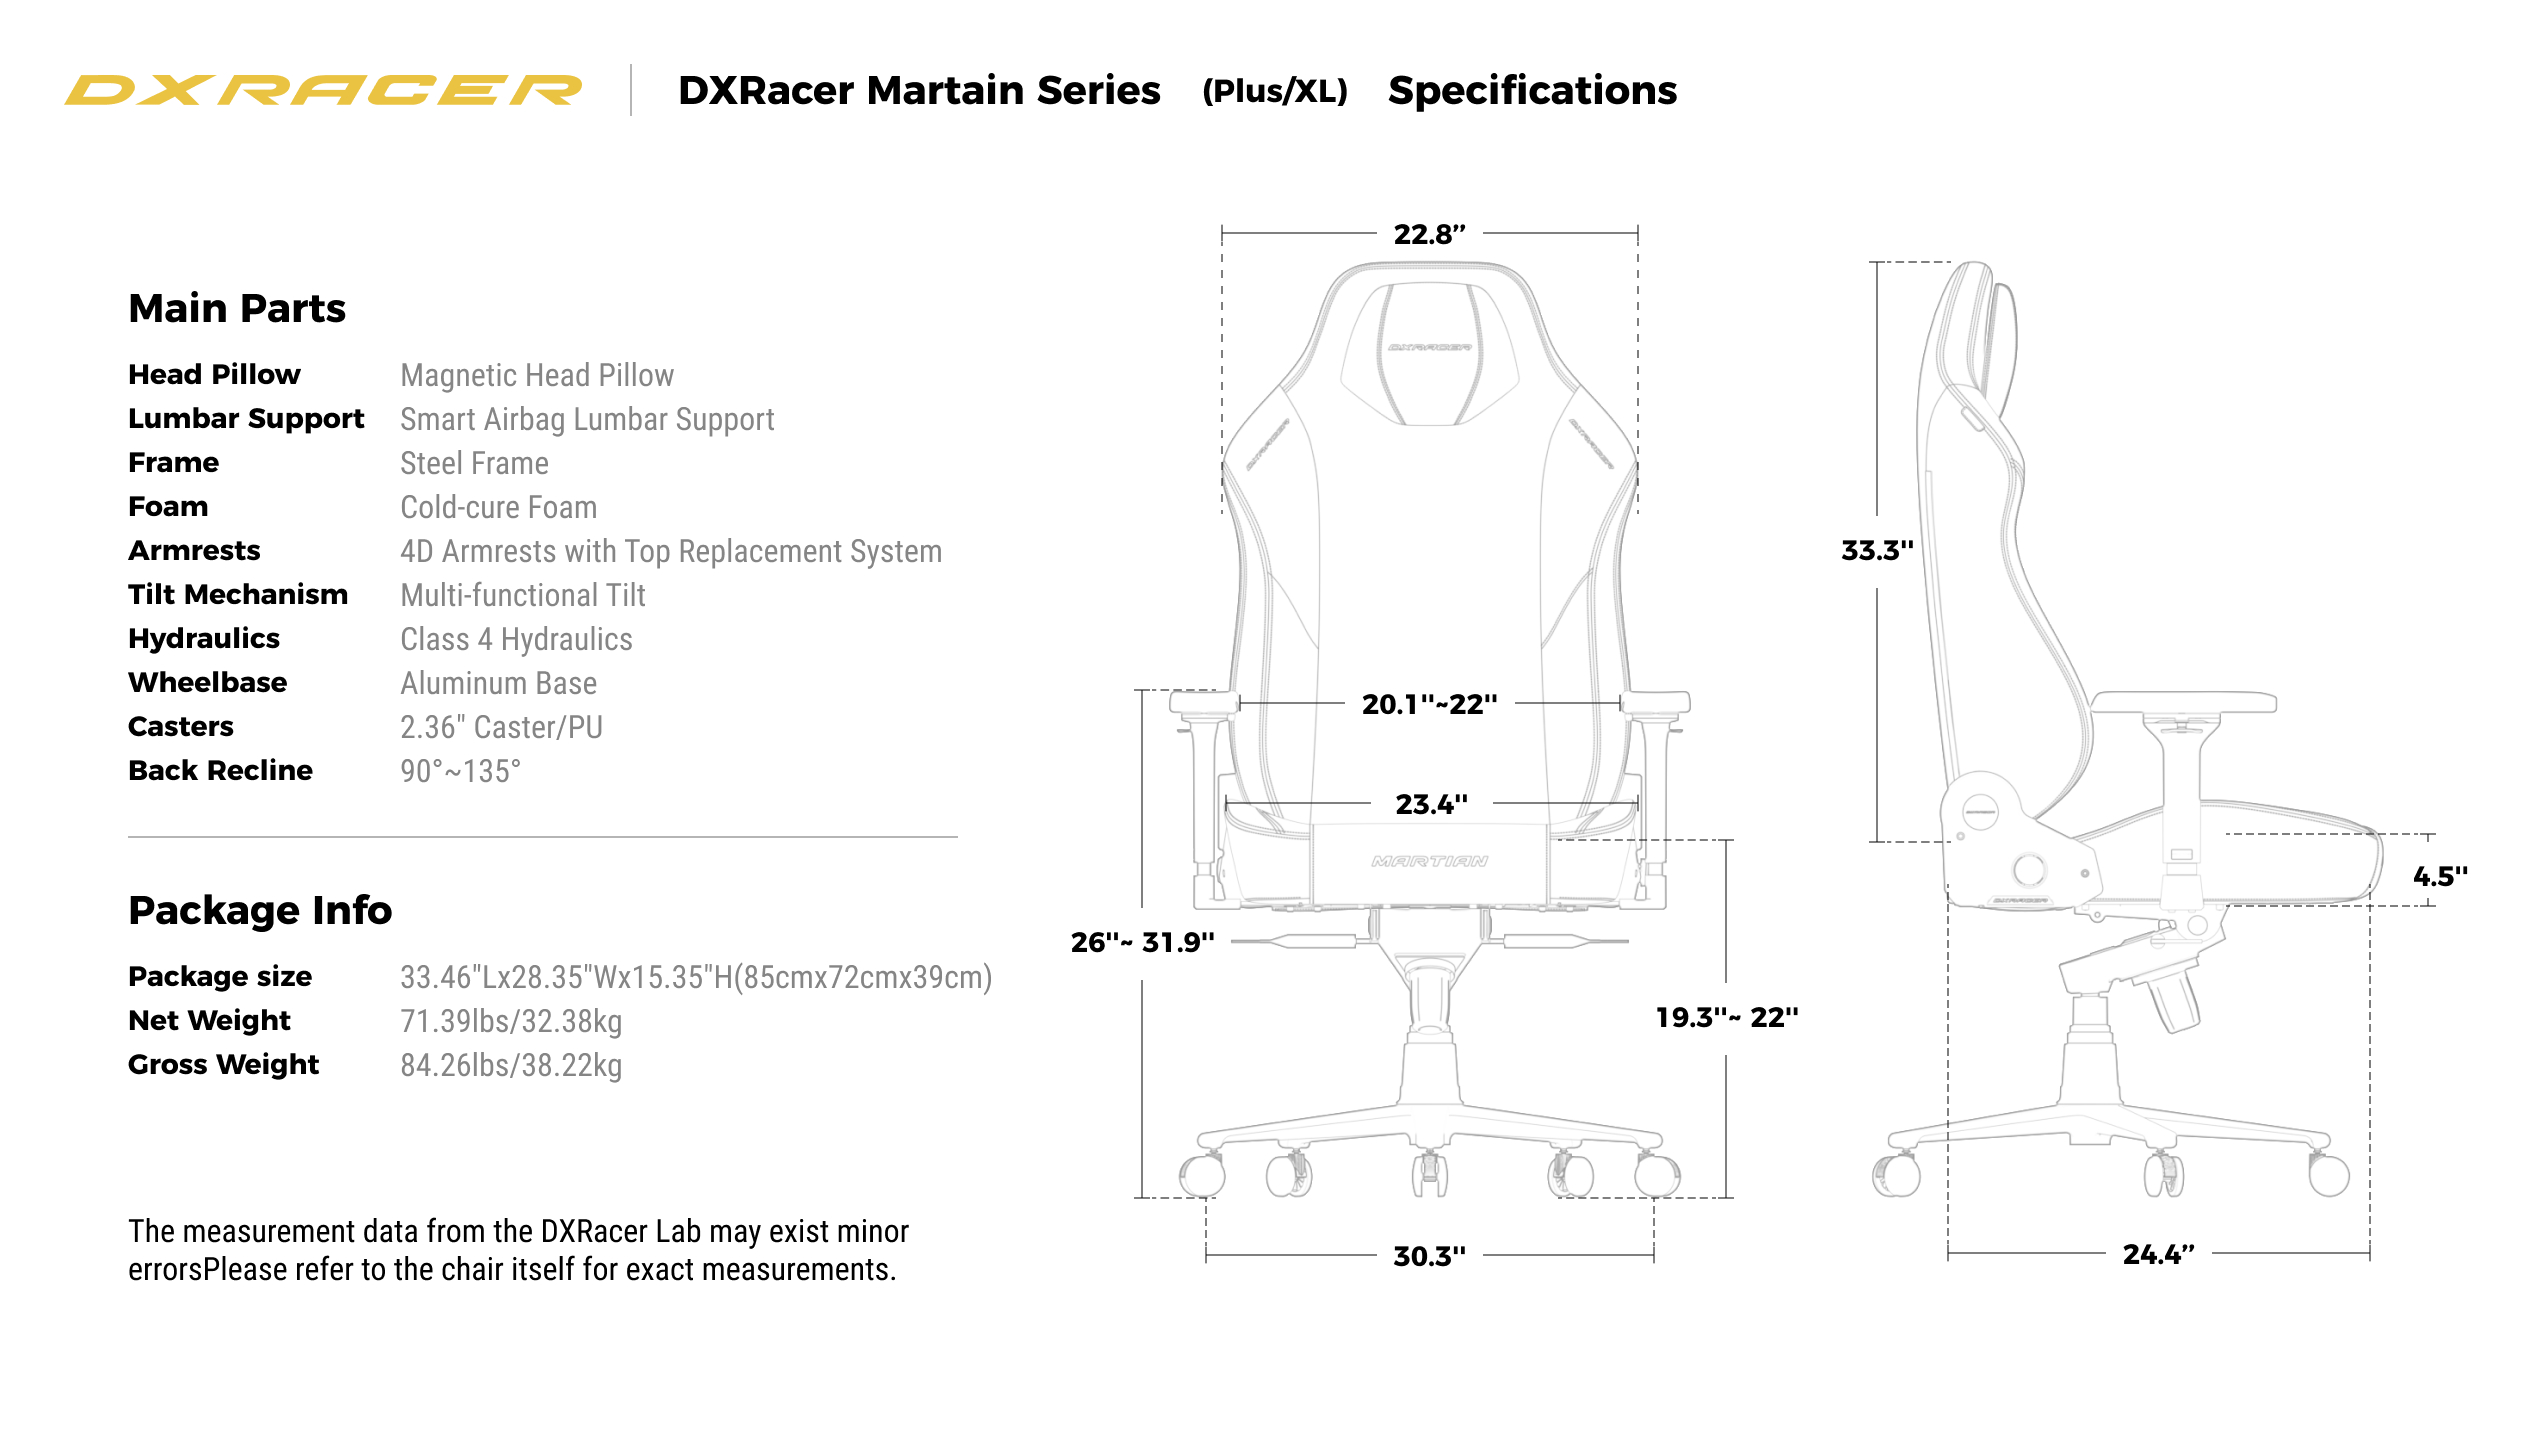 Specifications (Plus / XL)